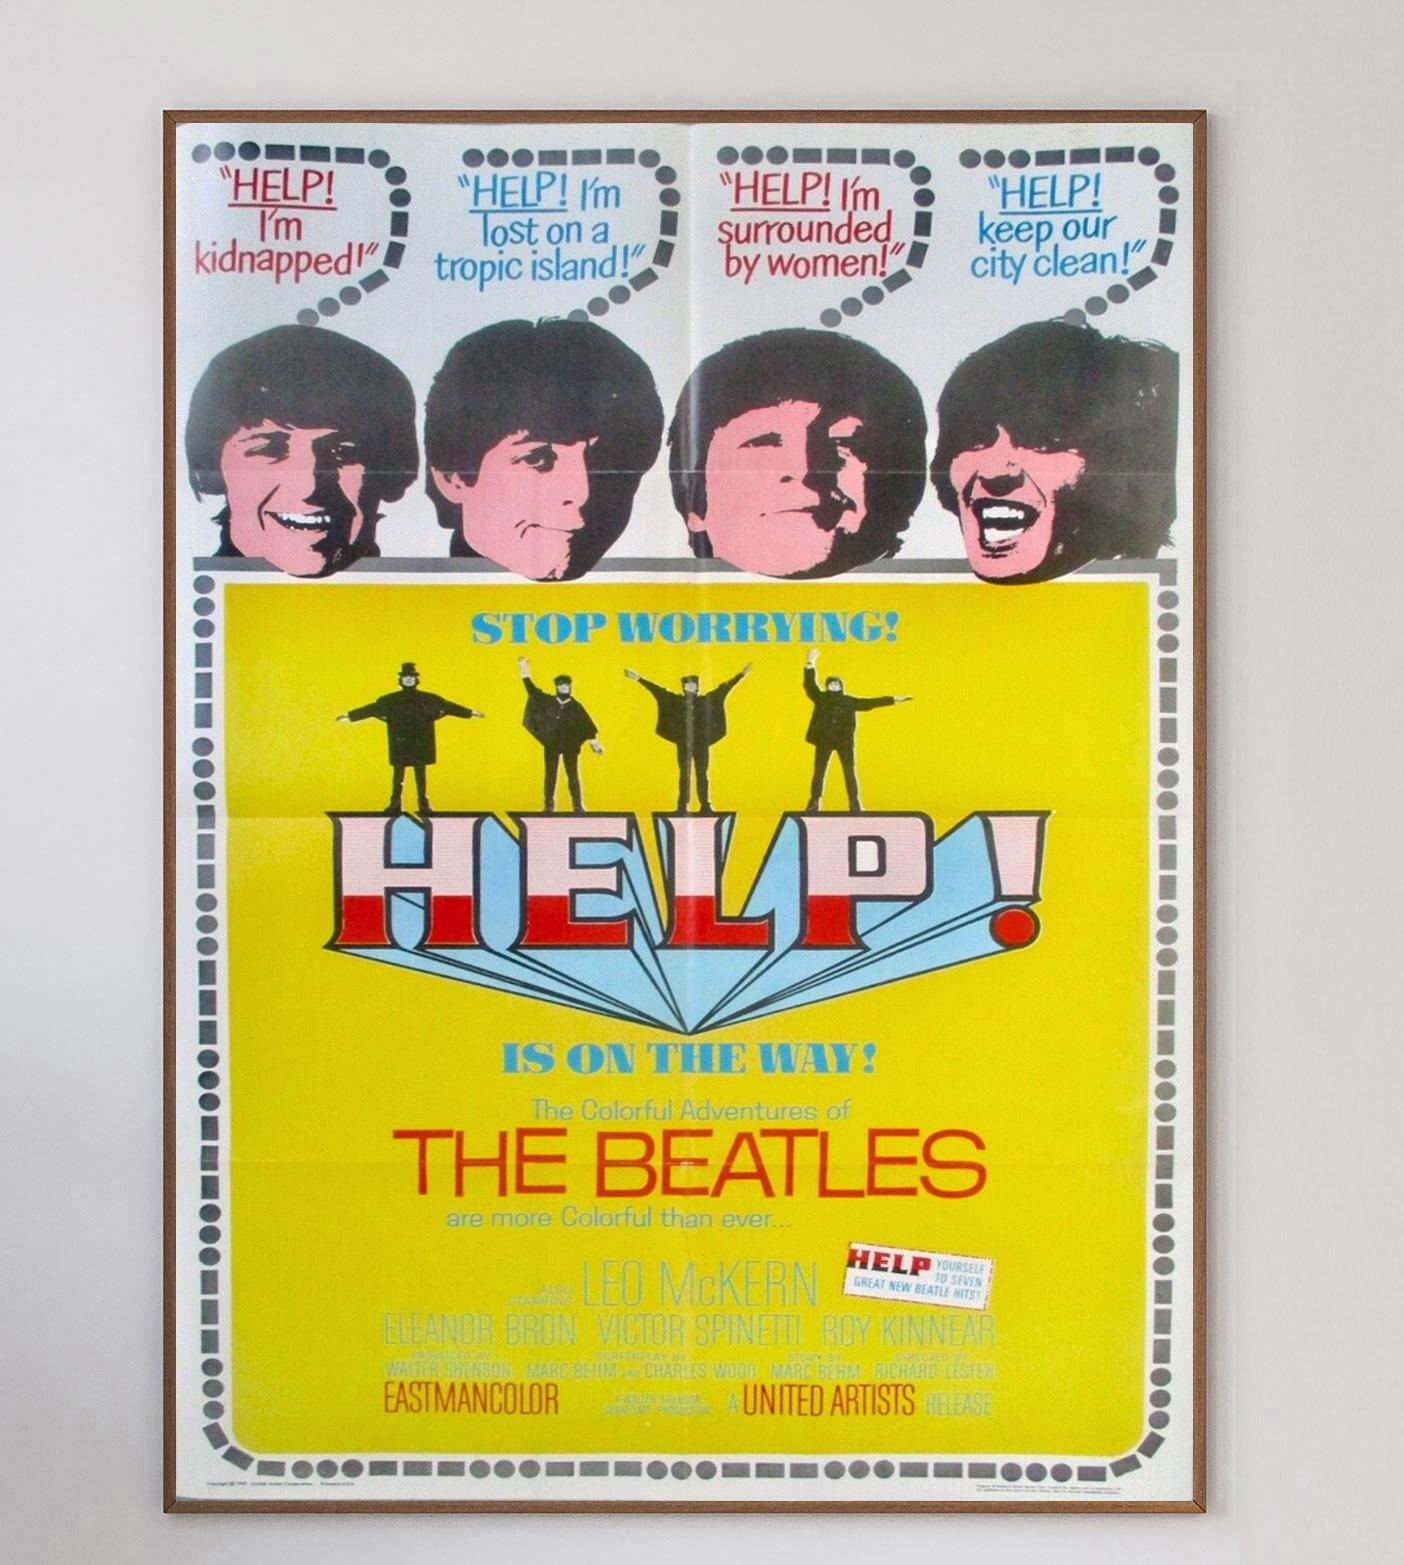 The second Beatles film following A Hard Day’s Night!, Help! Was released in 1965 alongside the wonderful soundtrack album of the same name. Featuring iconic songs such as “Ticket To Ride”, “You’ve Got To Hide Your Love Away” and of course the title